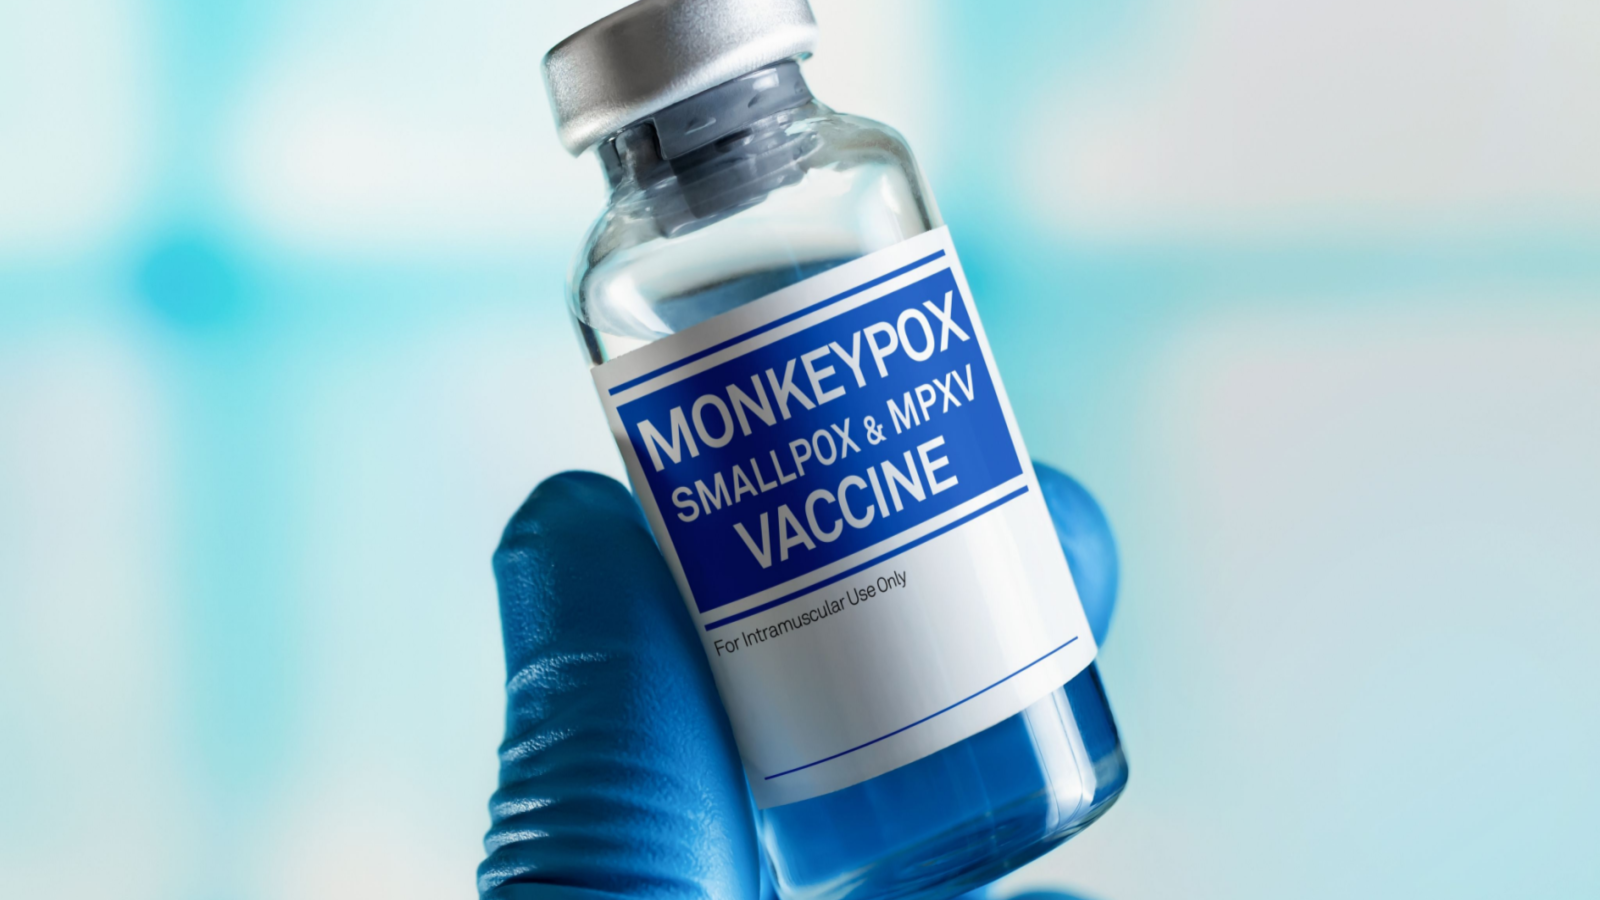 Vaccination for booster shot for Smallpox and Monkeypox (MPXV). Doctor with vial of the doses vaccine for Monkeypox (MPXV) disease. representing BWV Stock